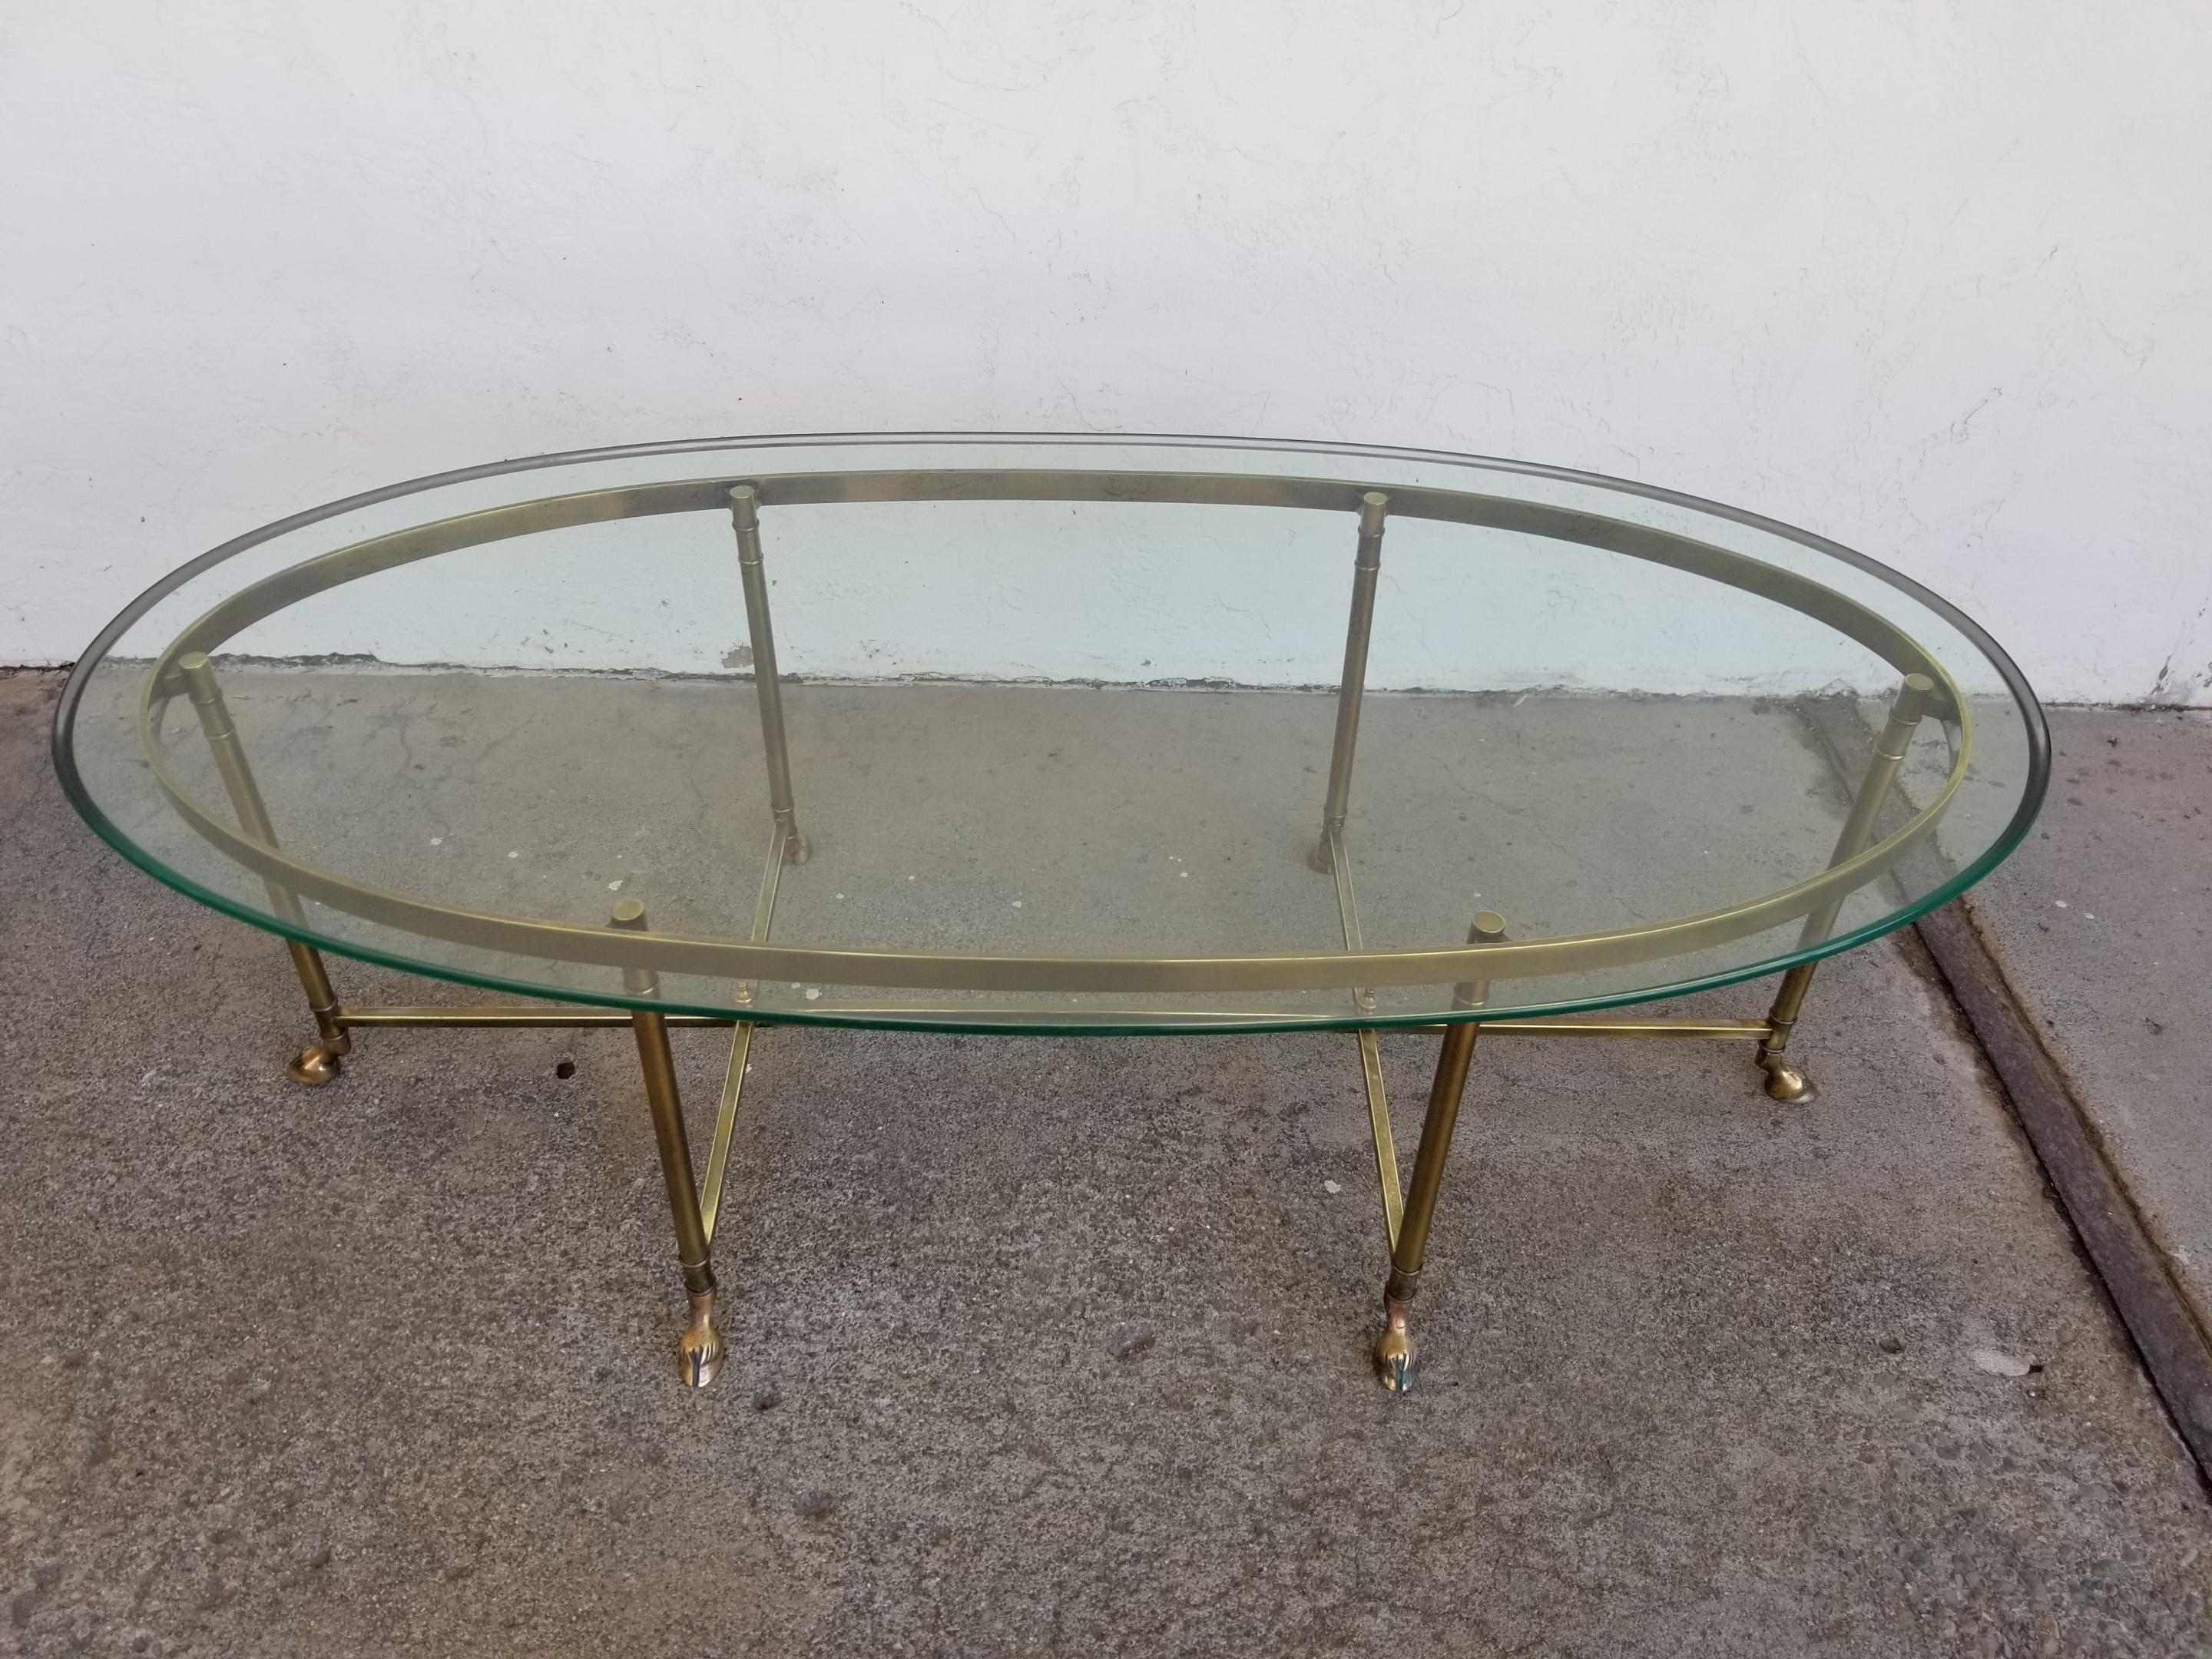 Fine and elegant solid brass coffee table with amazing beveled glass oval top. Hoof feet detail. Very good original vintage condition with original glass top.